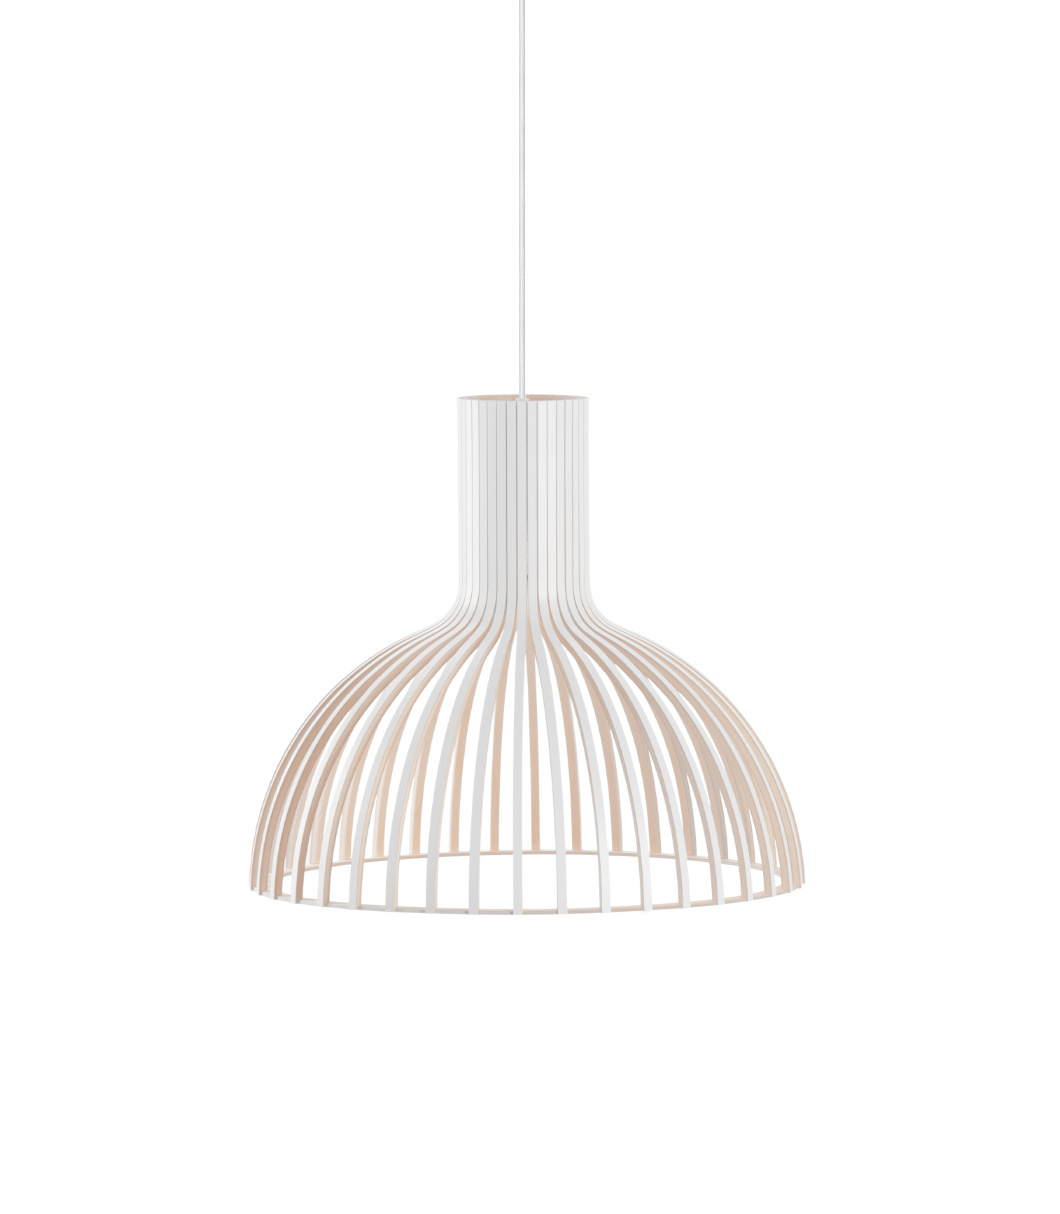 Victo Small 4251 pendant lamp is available in white laminated